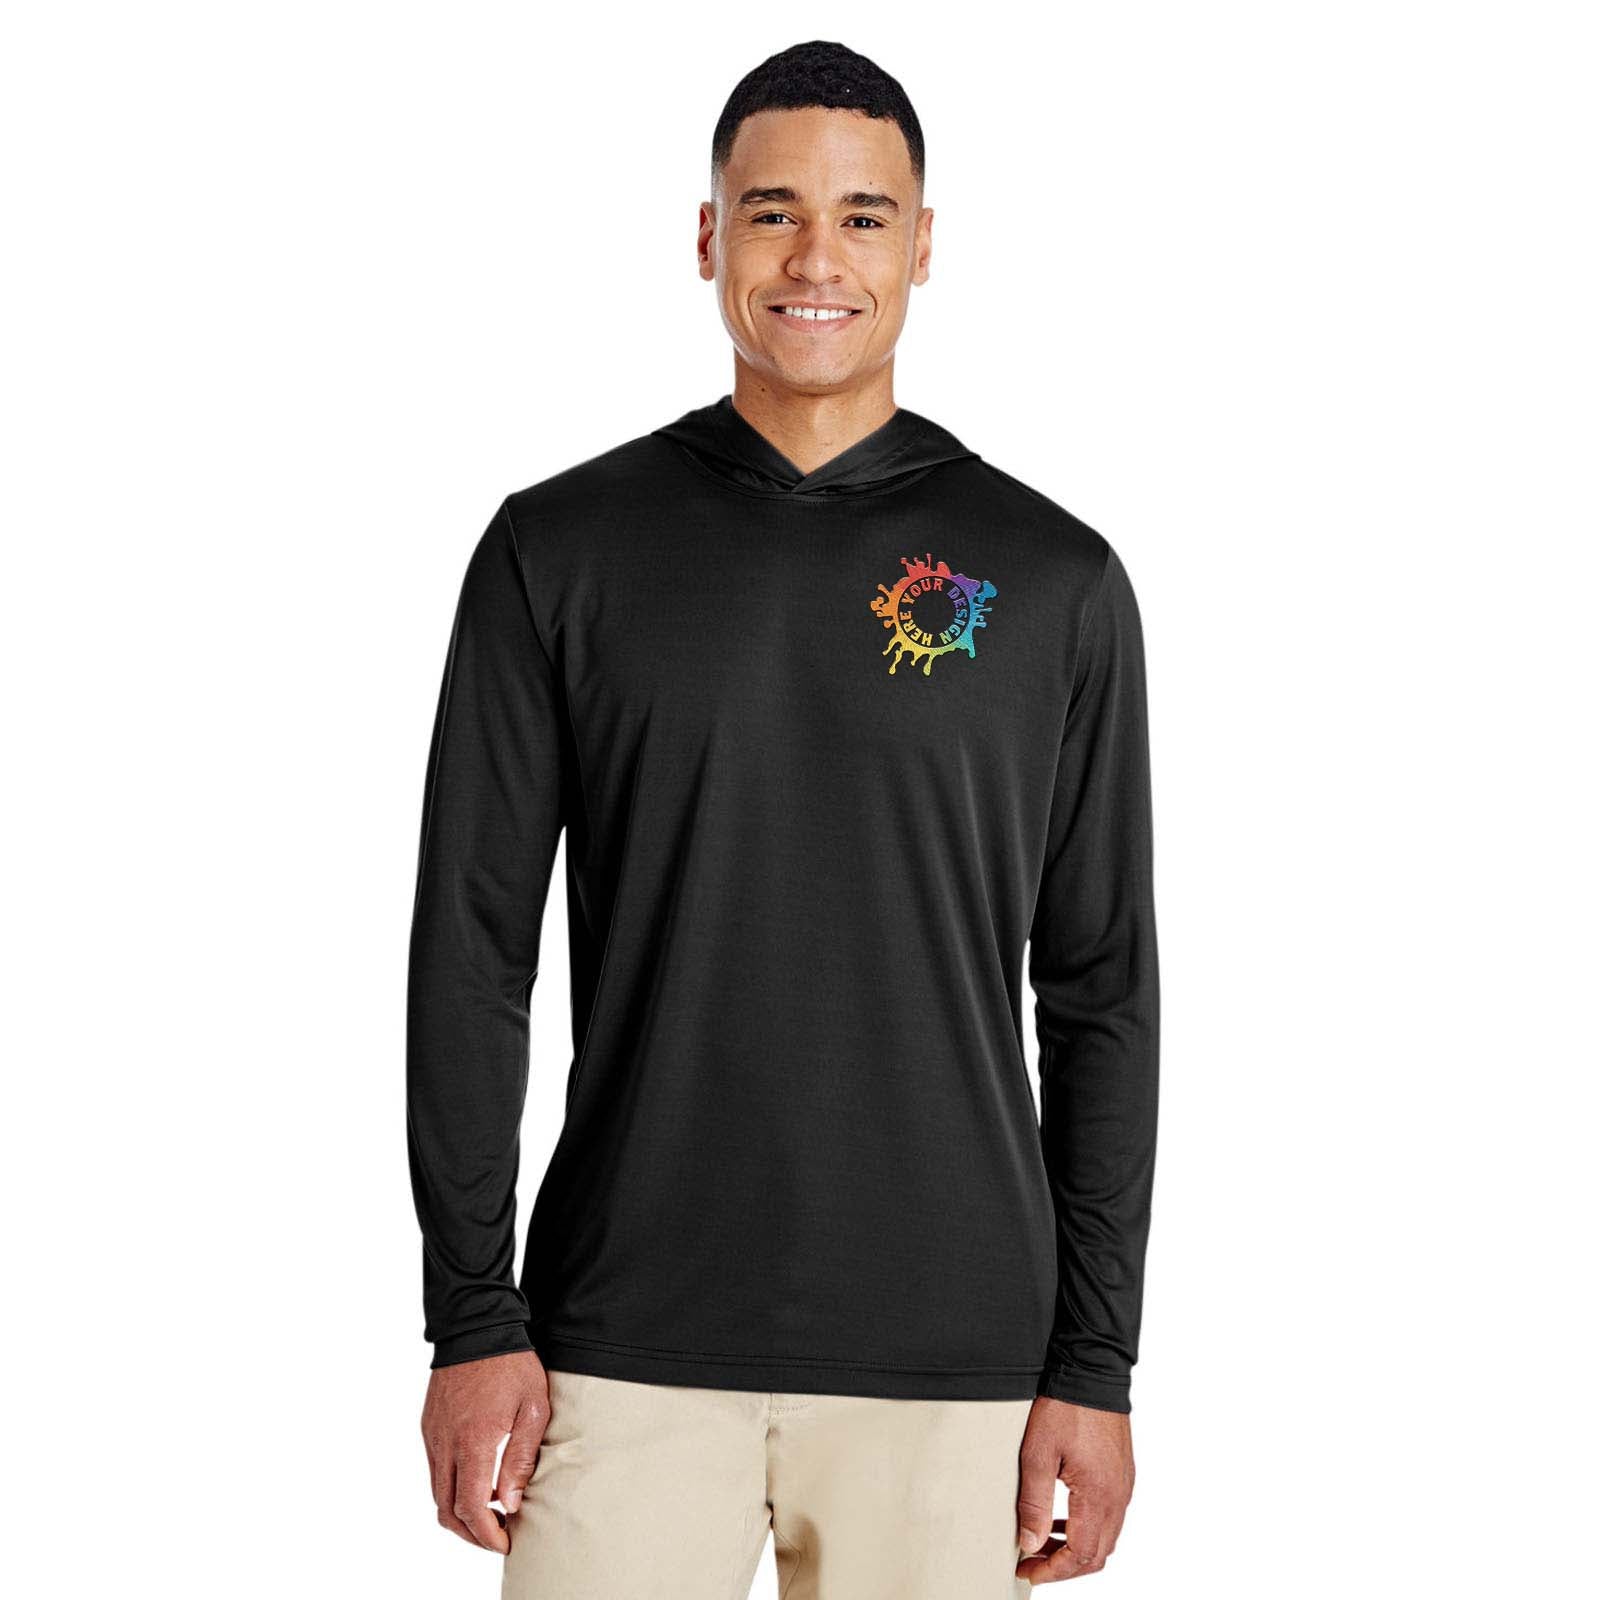 Embroidered Team 365 Men's Zone Performance Hoodie - Mato & Hash